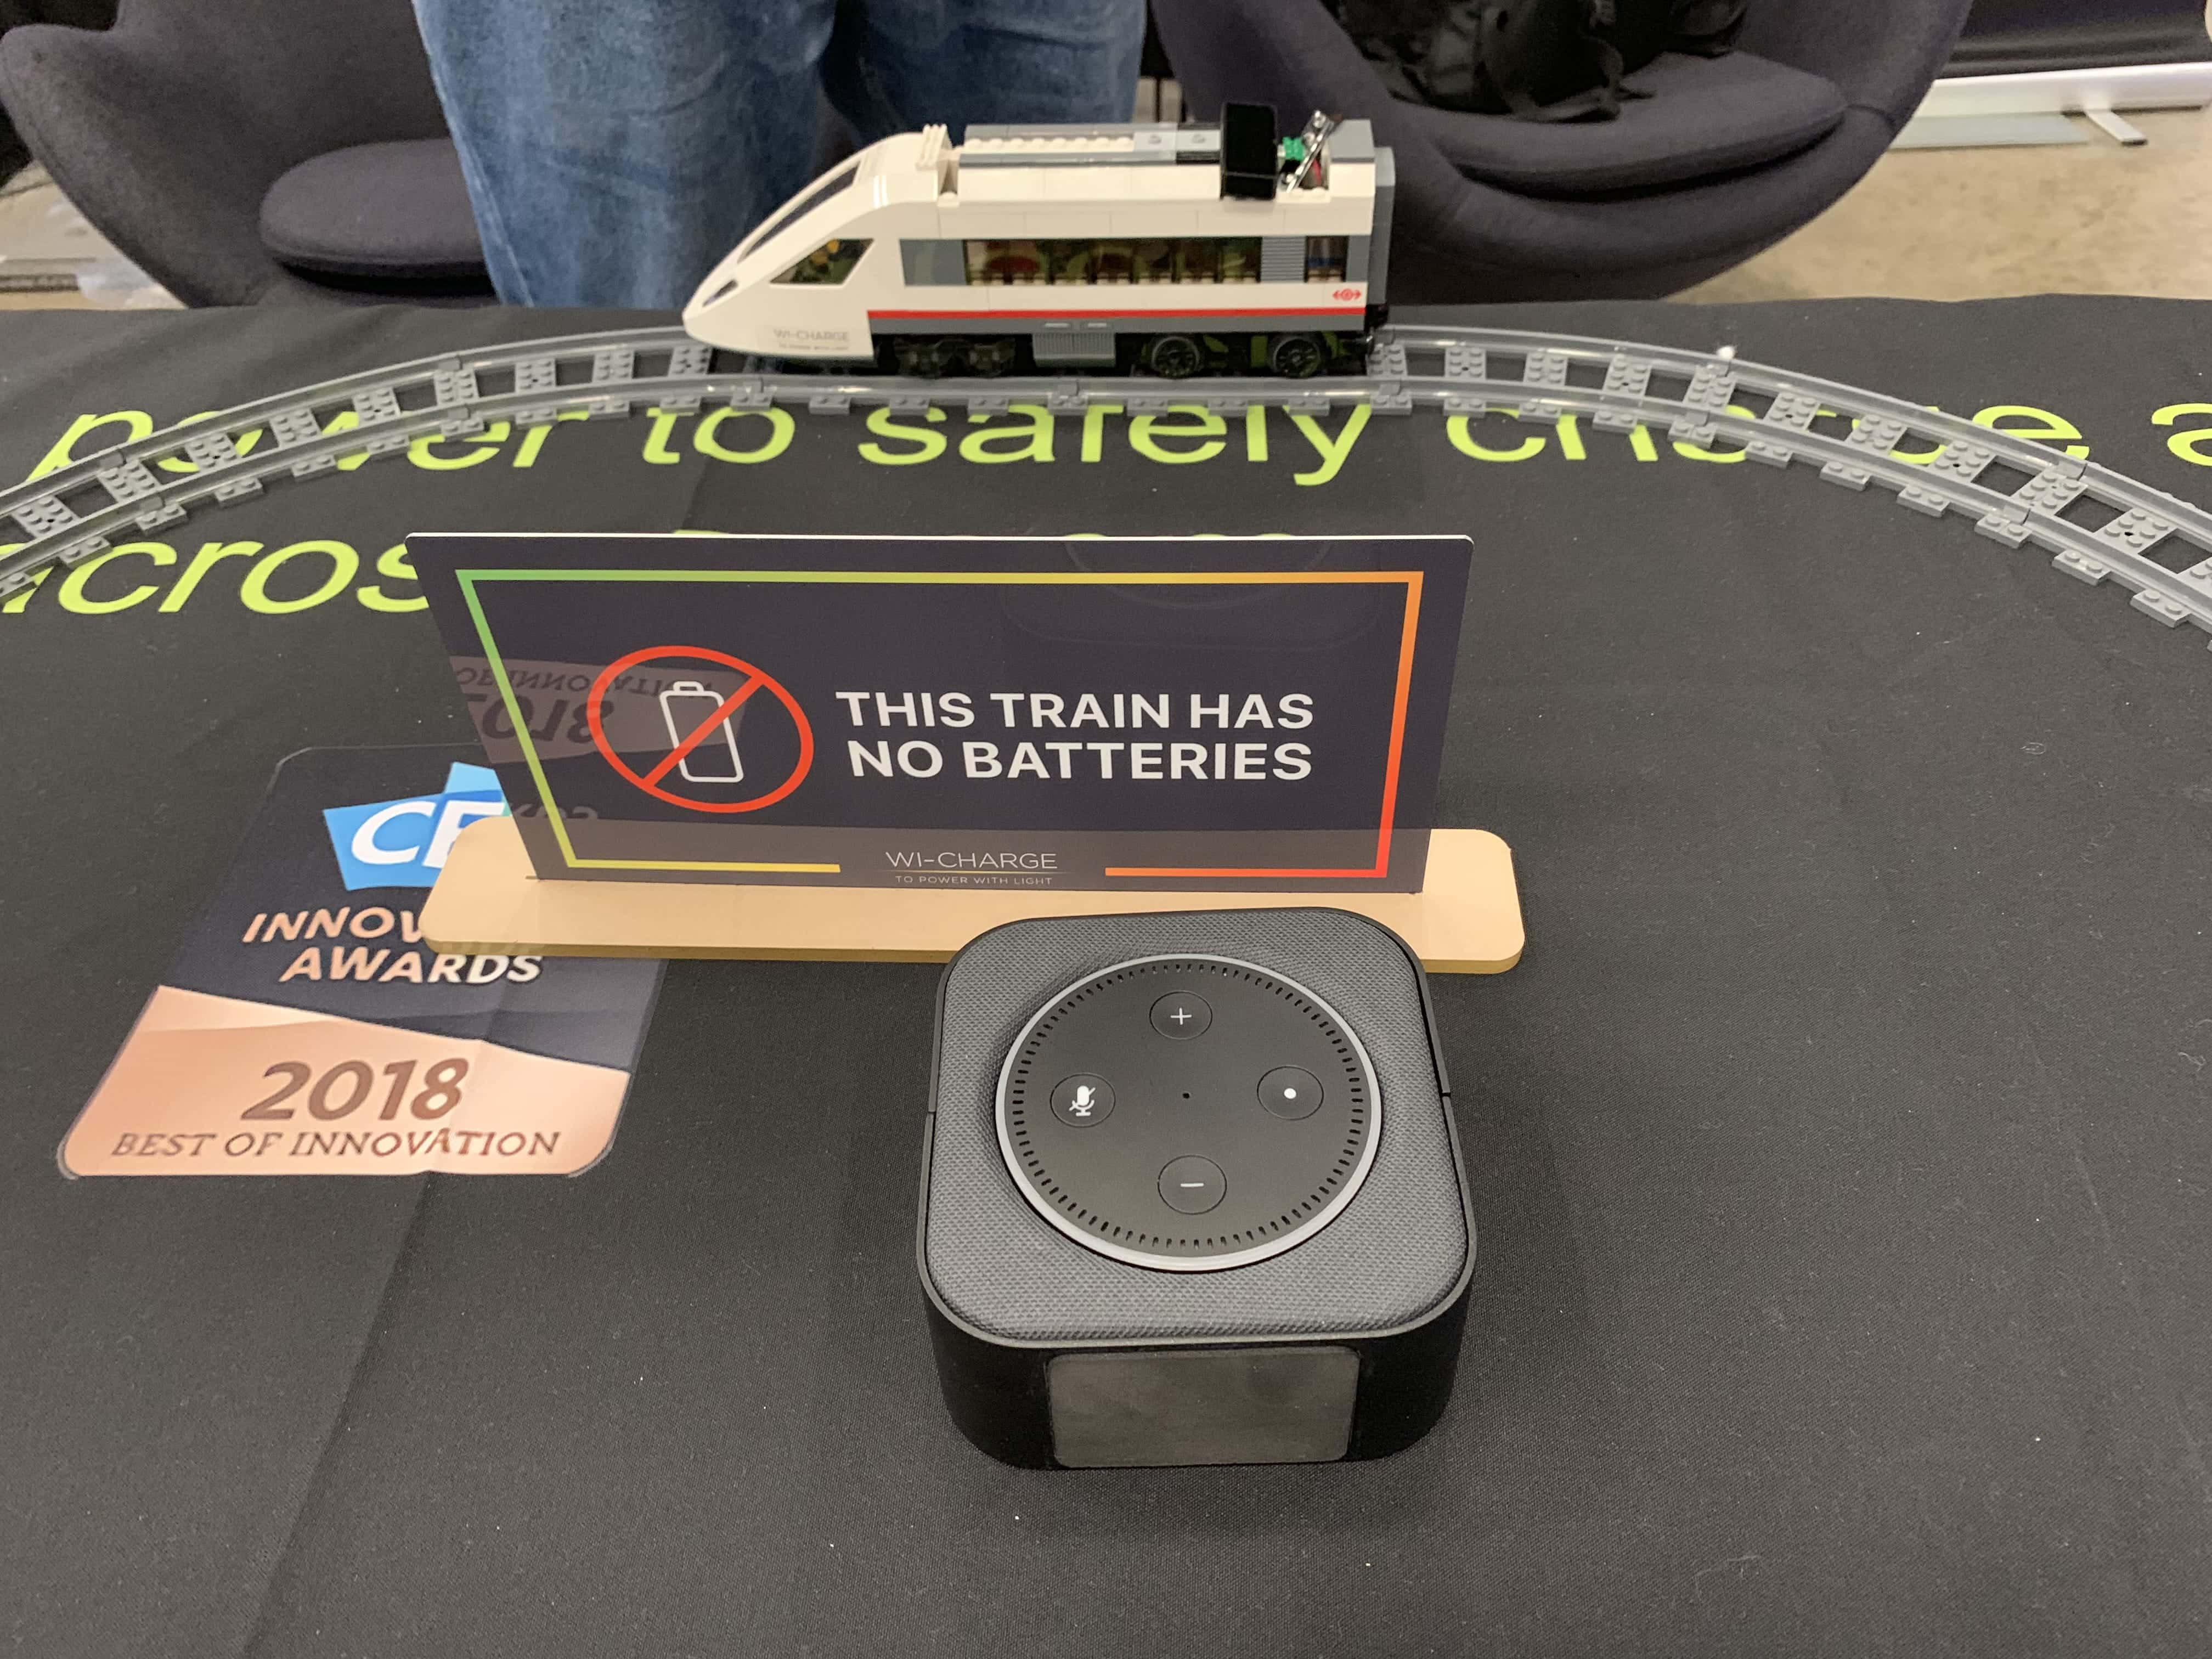 SXSW: Wi-Charge Uses Infrared to Wirelessly Charge Your Devices